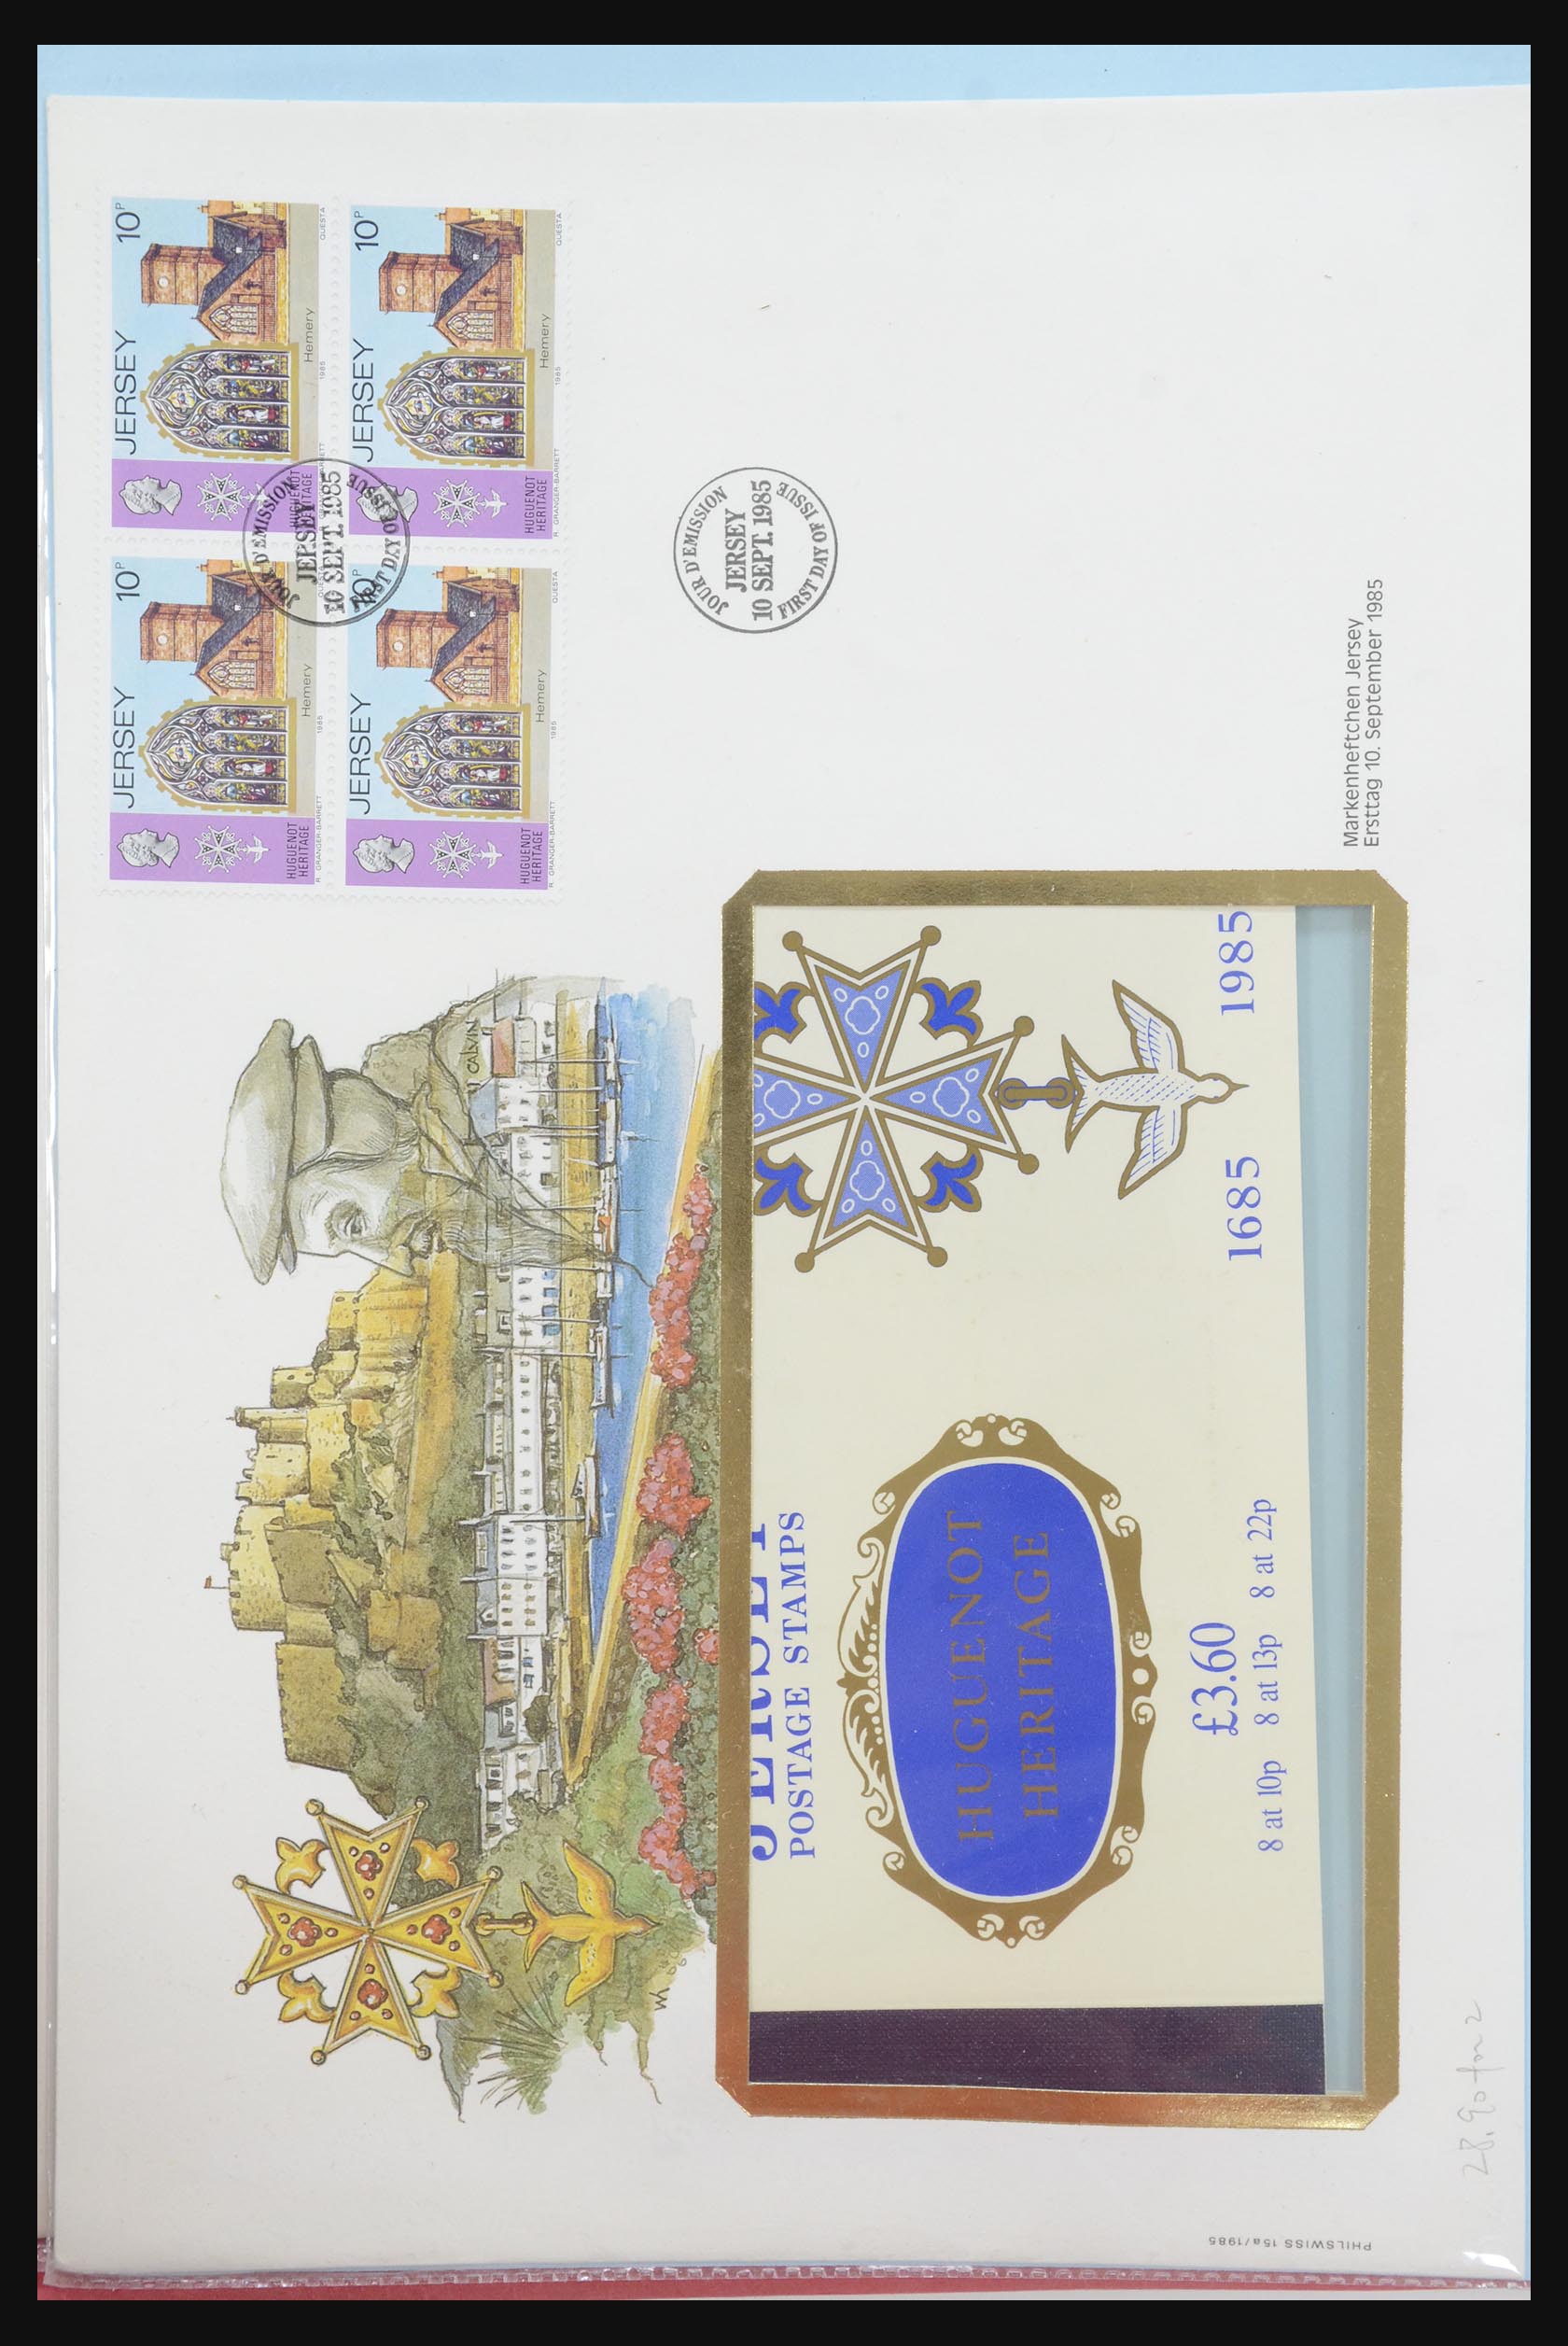 31915 081 - 31915 Western Europe souvenir sheets and stamp booklets on FDC.